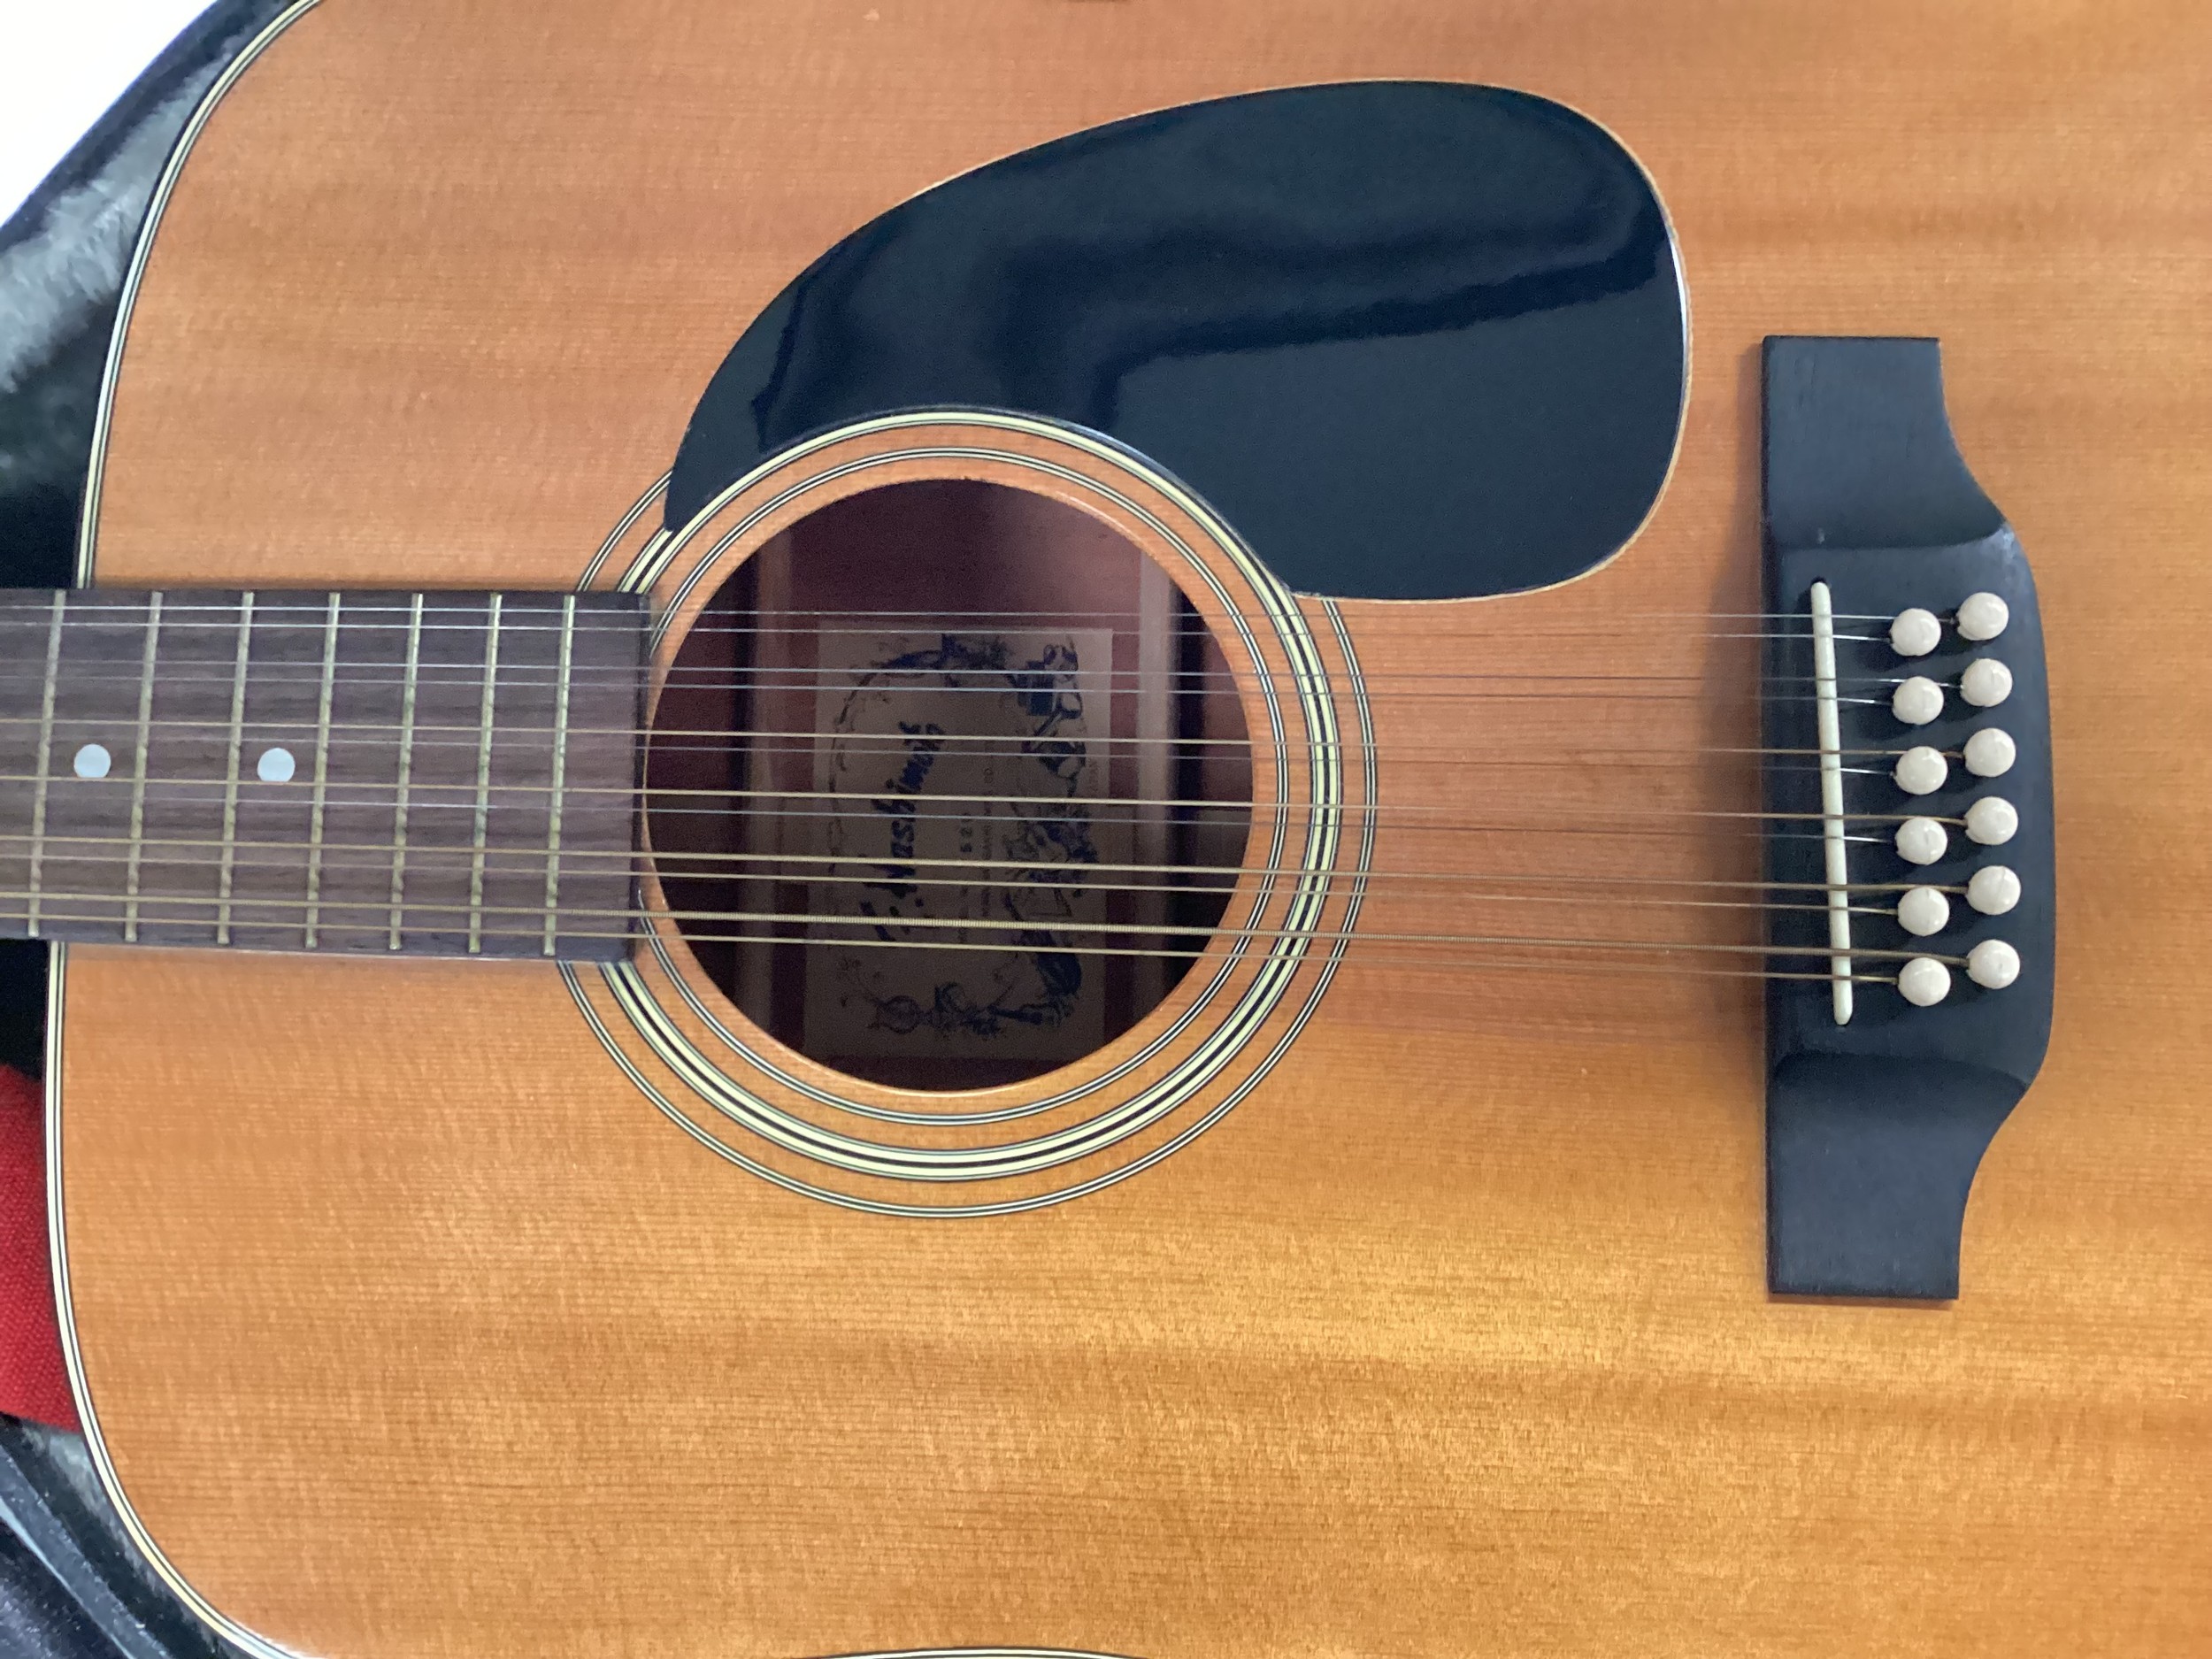 F HASHIMOTO DREADNOUGHT GUITAR. This is a right handed 12 string guitar with model No. T.520 made in - Image 8 of 9